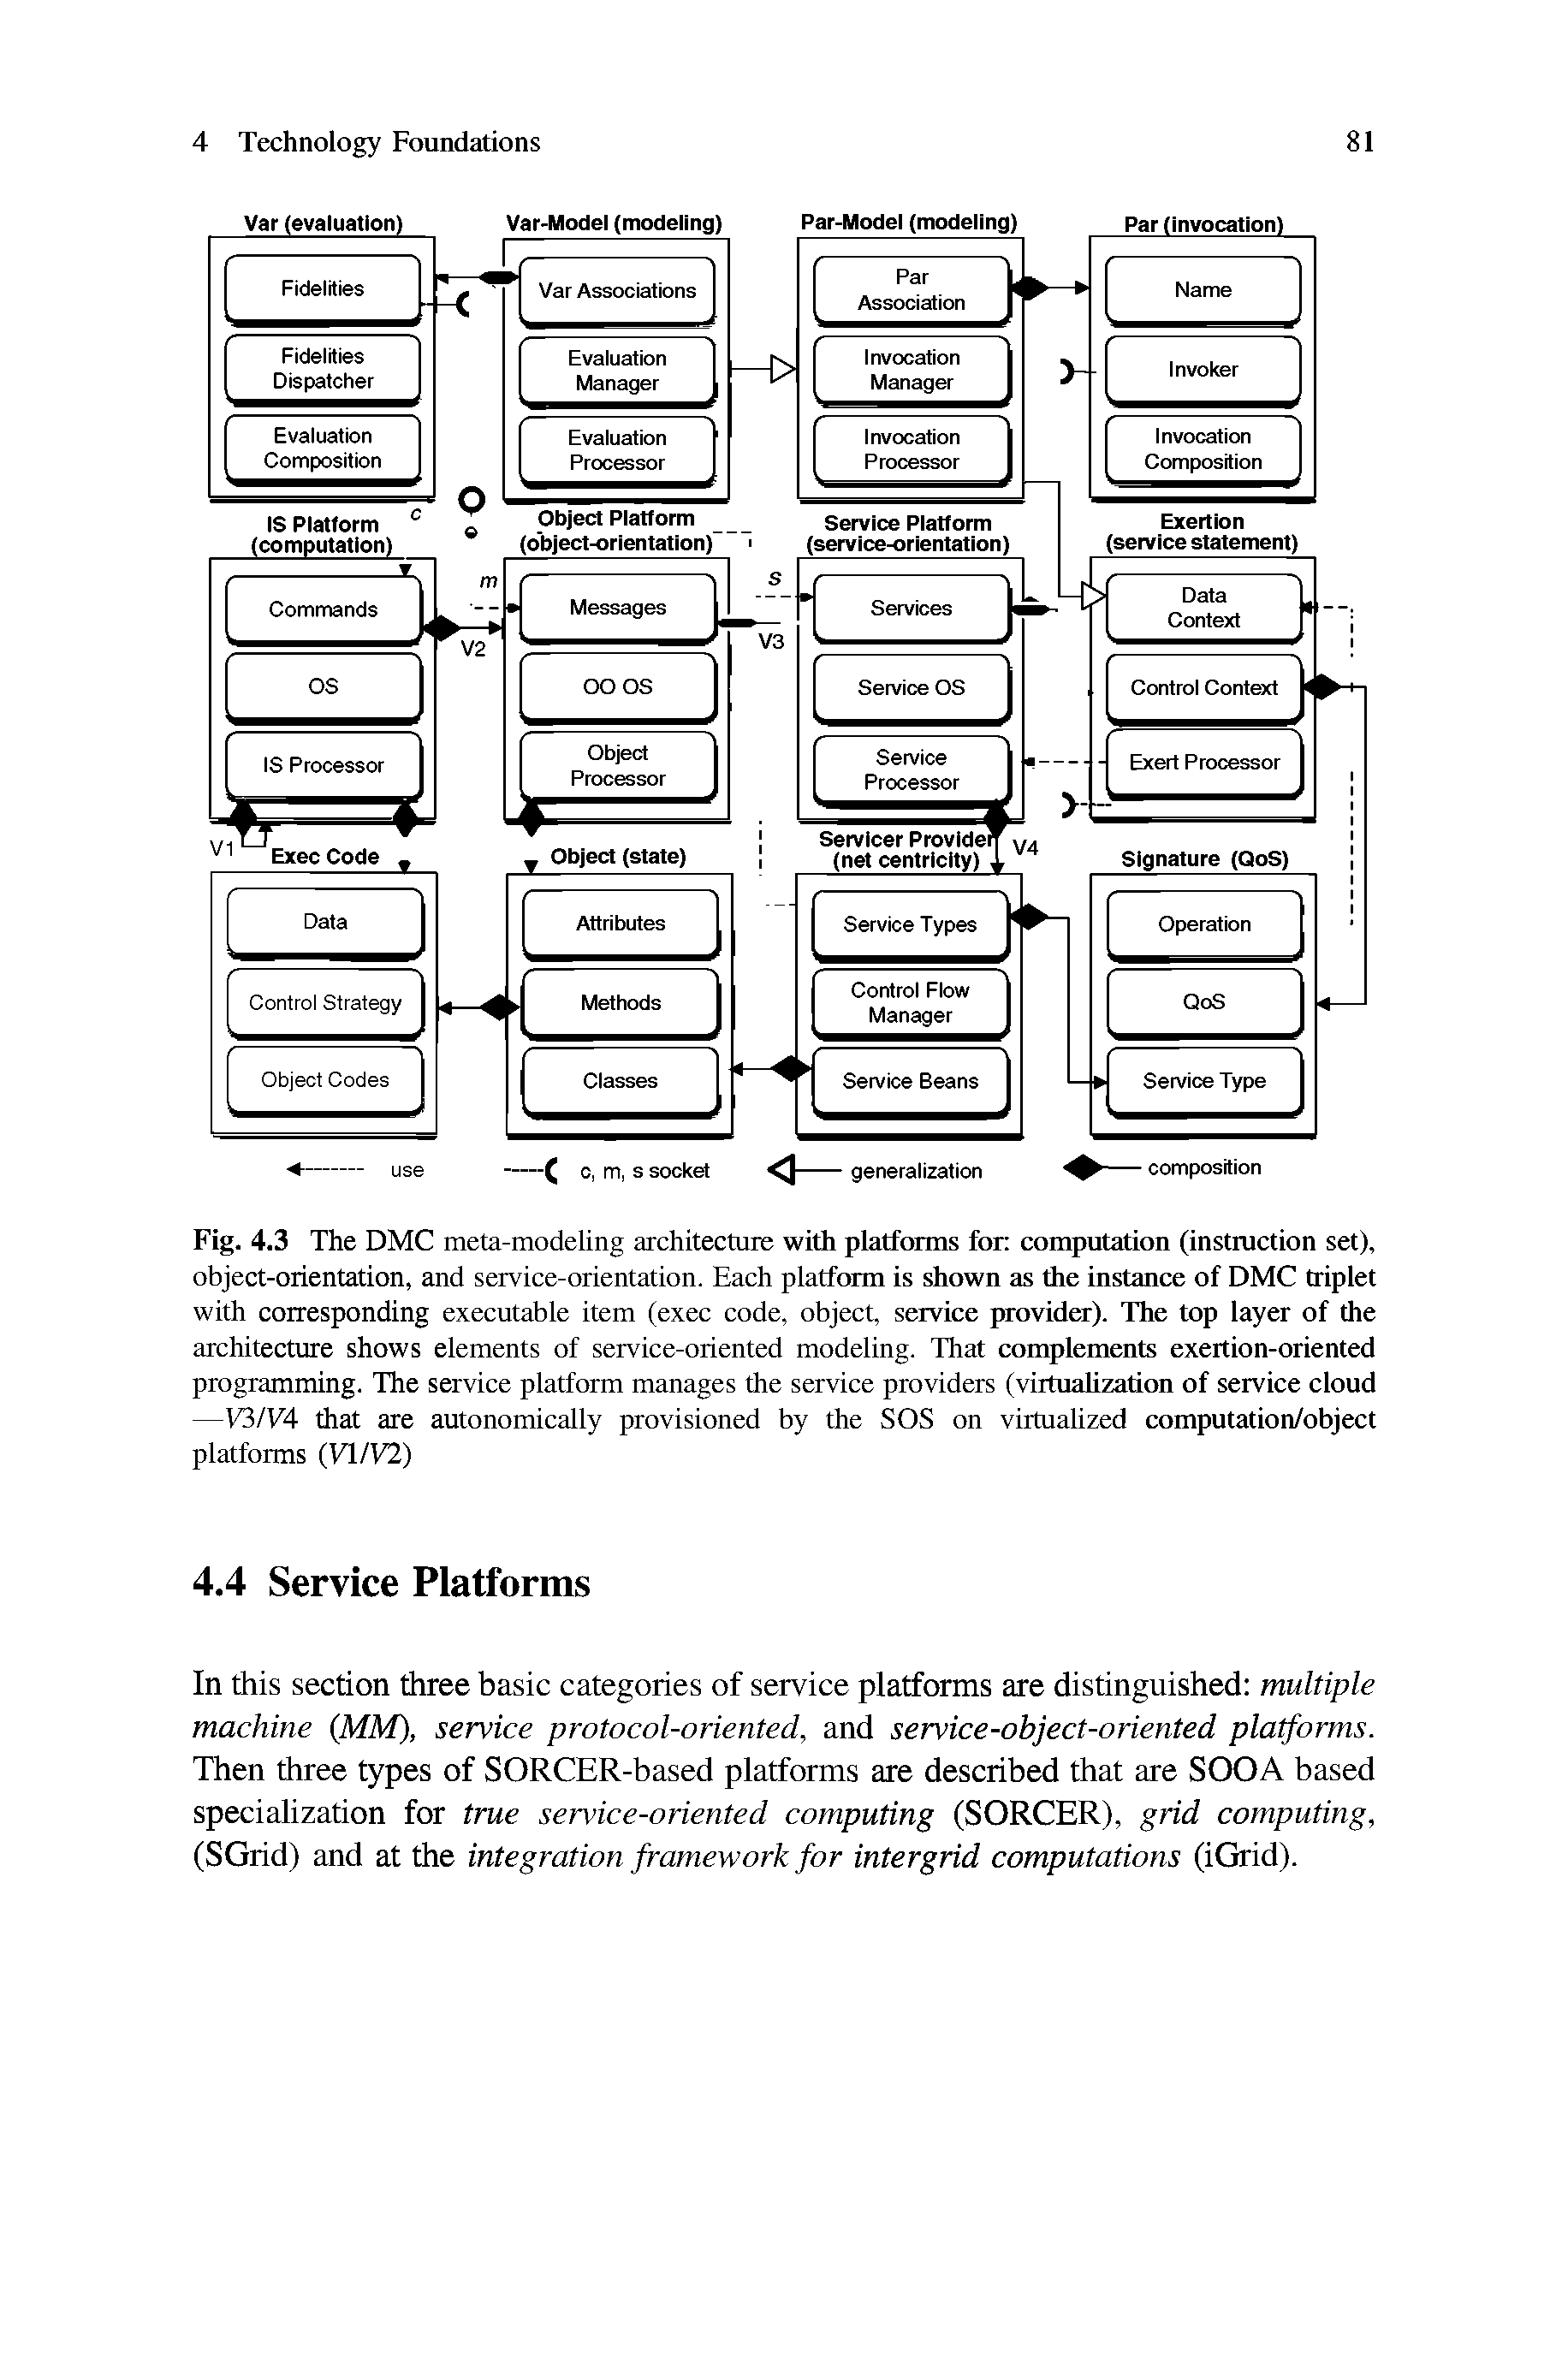 Fig. 4.3 The DMC meta-modeling architecture with platforms for computation (instruction set), object-orientation, and service-orientation. Each platform is shown as the instance of DMC triplet with corresponding executable item (exec code, object, service provider). The top layer of the architecture shows elements of service-oriented modeling. That complements exertion-oriented programming. The service platform manages the service providers (virtualization of service cloud —V3/V4 that are autonomically provisioned by the SOS on virtualized computation/object platforms (yHV2)...